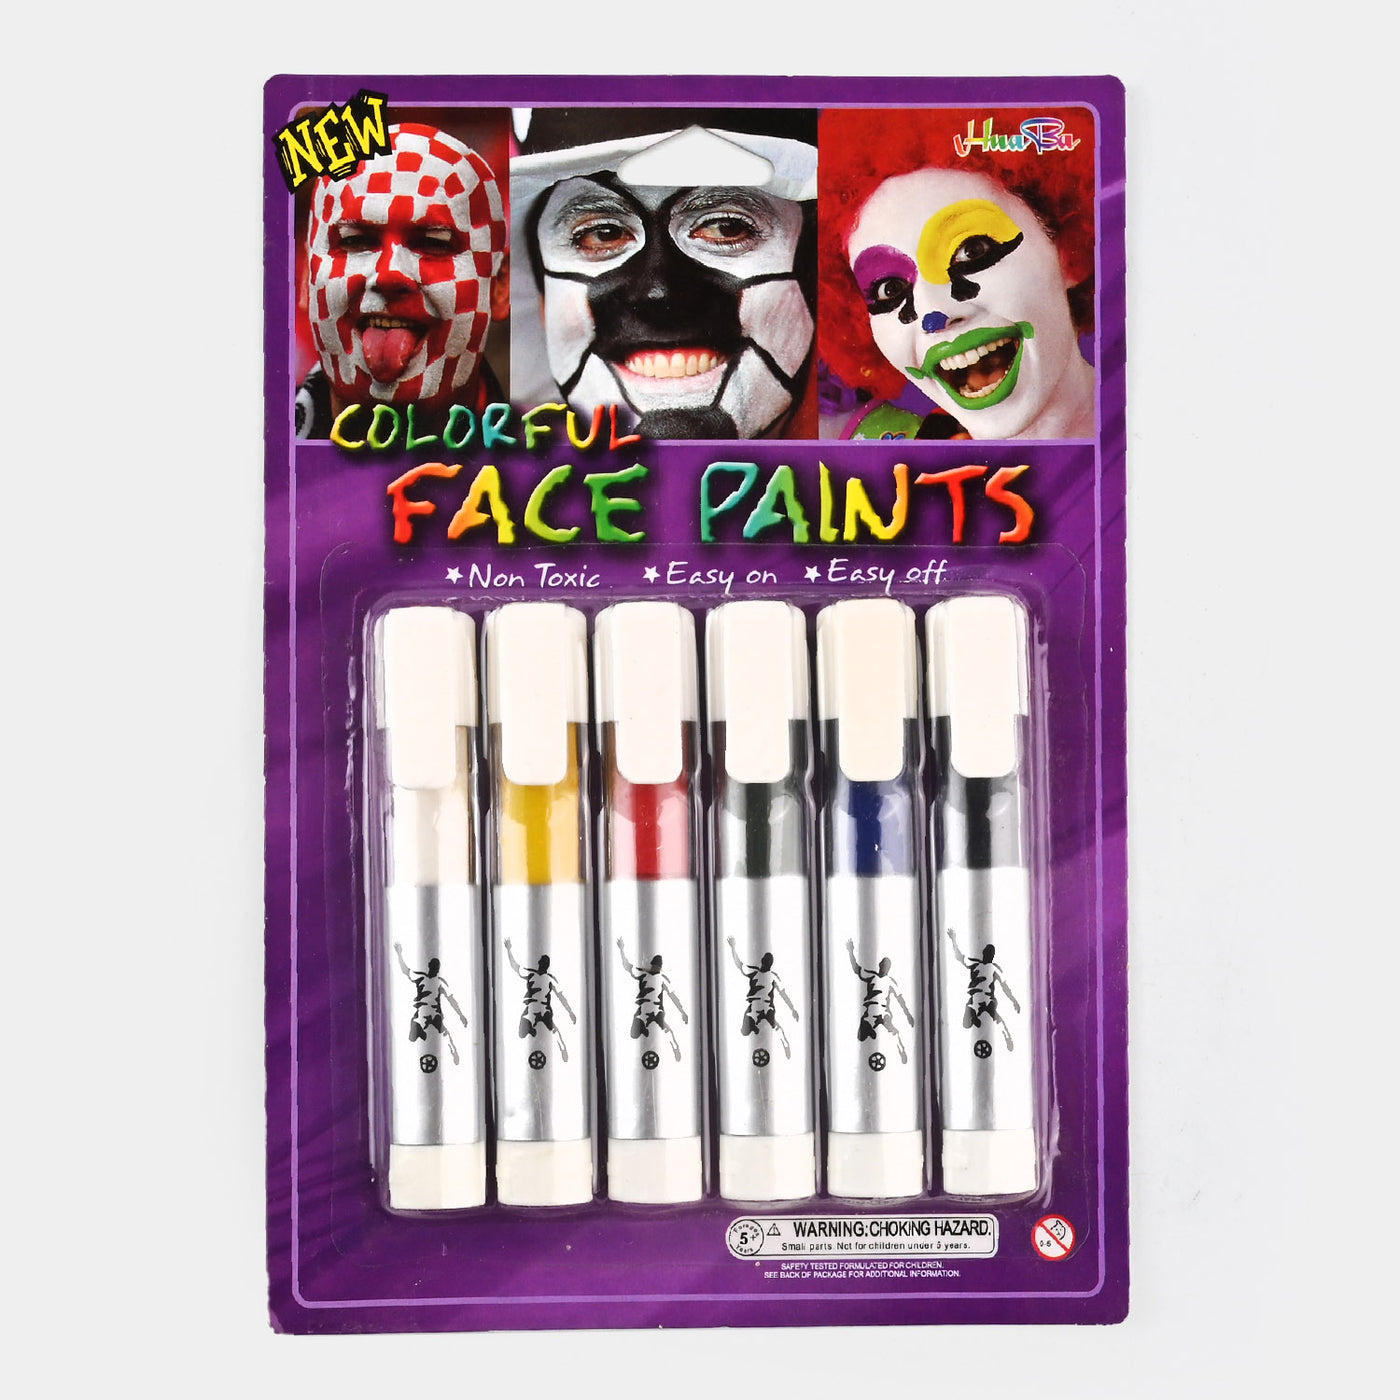 Colorful Face Paint For kids